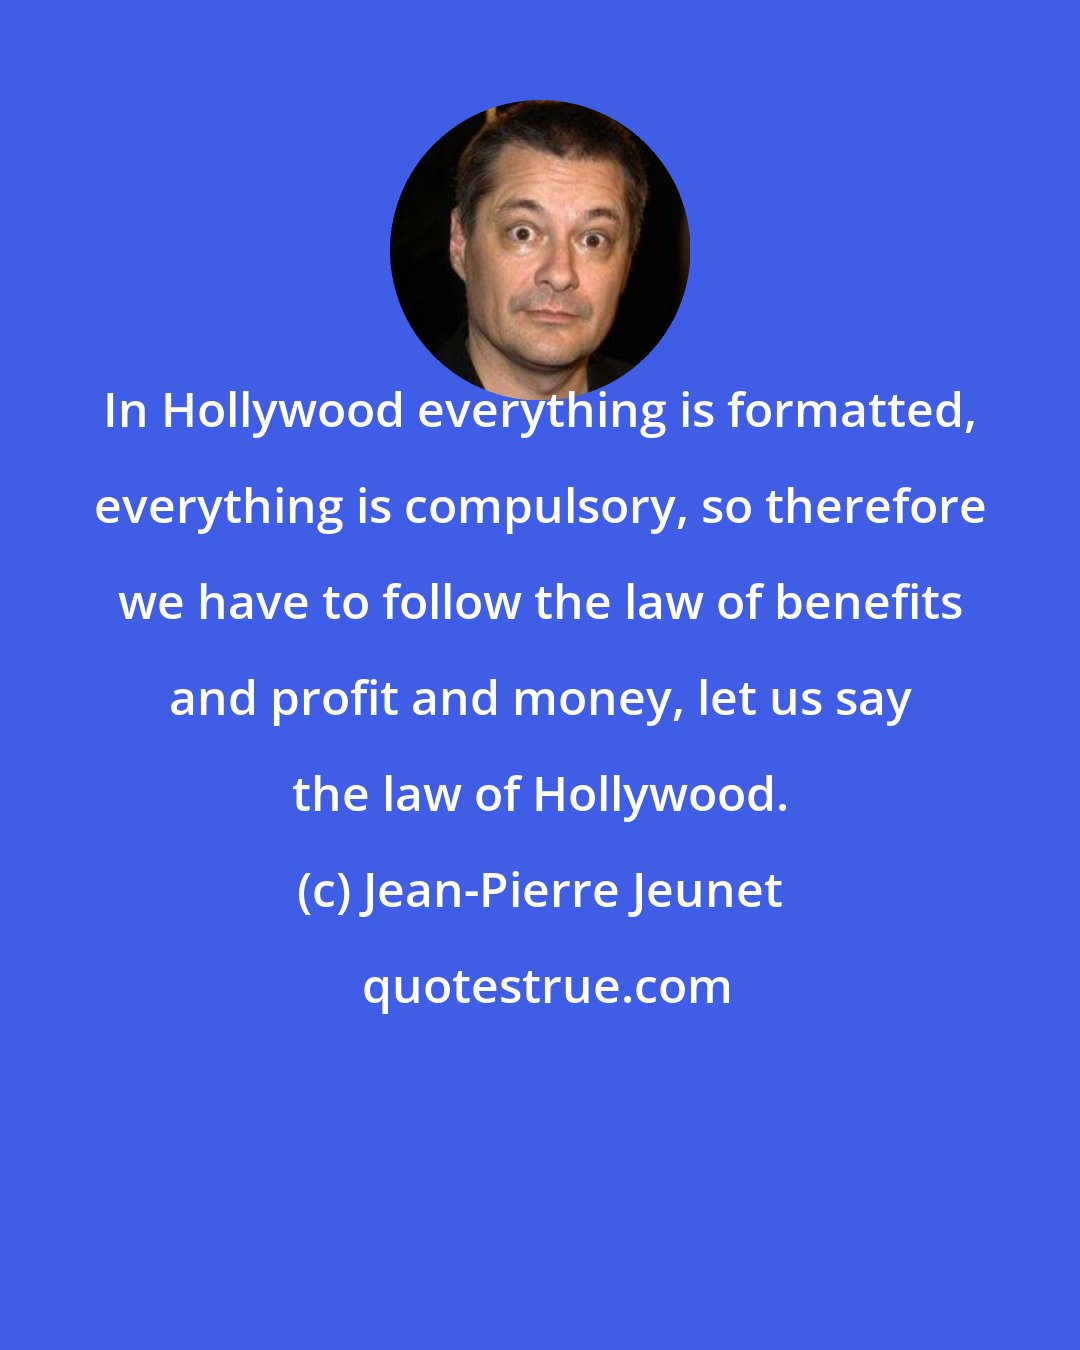 Jean-Pierre Jeunet: In Hollywood everything is formatted, everything is compulsory, so therefore we have to follow the law of benefits and profit and money, let us say the law of Hollywood.